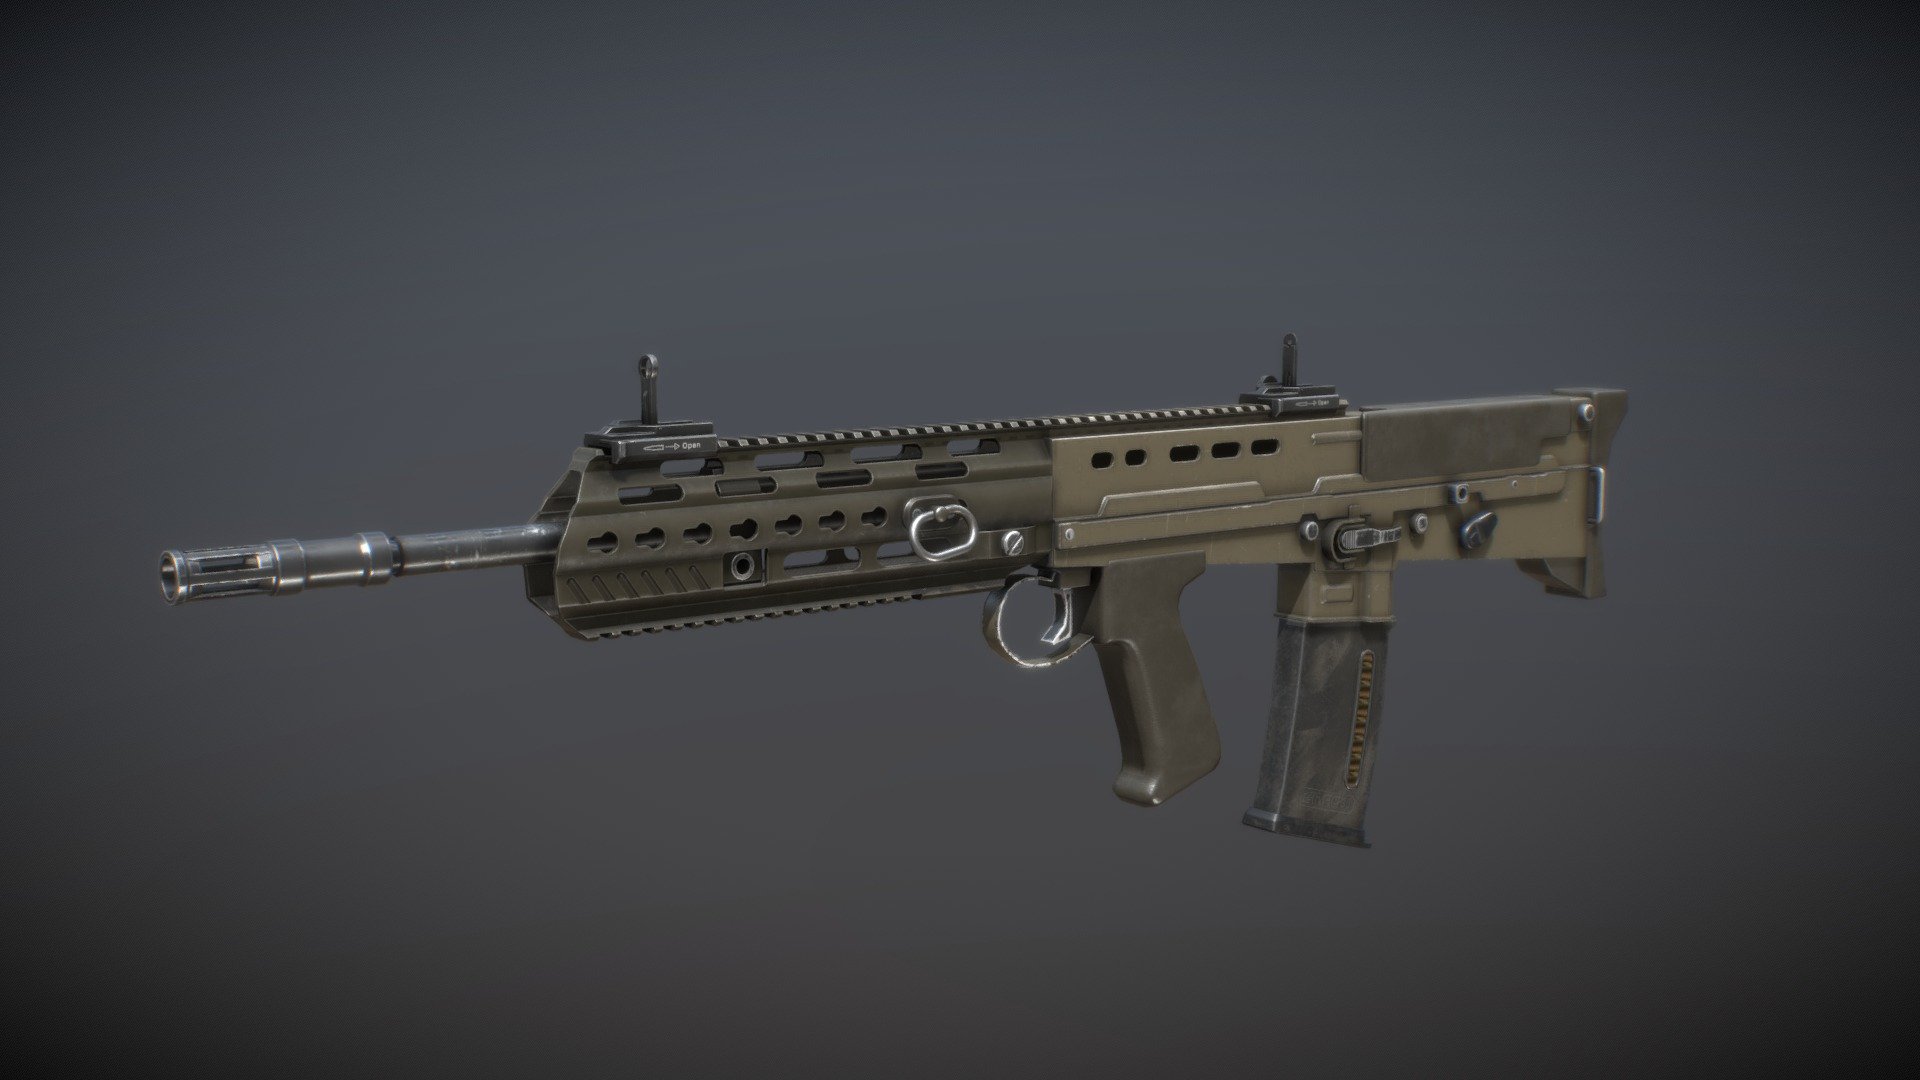 &ldquo;The L85A2 is the latest iteration of the original SA80 which began to serve the British Army in the mid-1980s. However, this bullpup has been modified since then to the L85A2 and now, has gone through its latest round of modifications for its mid-life in the form of the L85A3. The goal of which is to extend the operational lifespan of all rifles to 2025. In addition, there is a lack of general political will to find a replacement for this weapon, so it is more cost effective to look at extending its operational lifespan with new modifications.